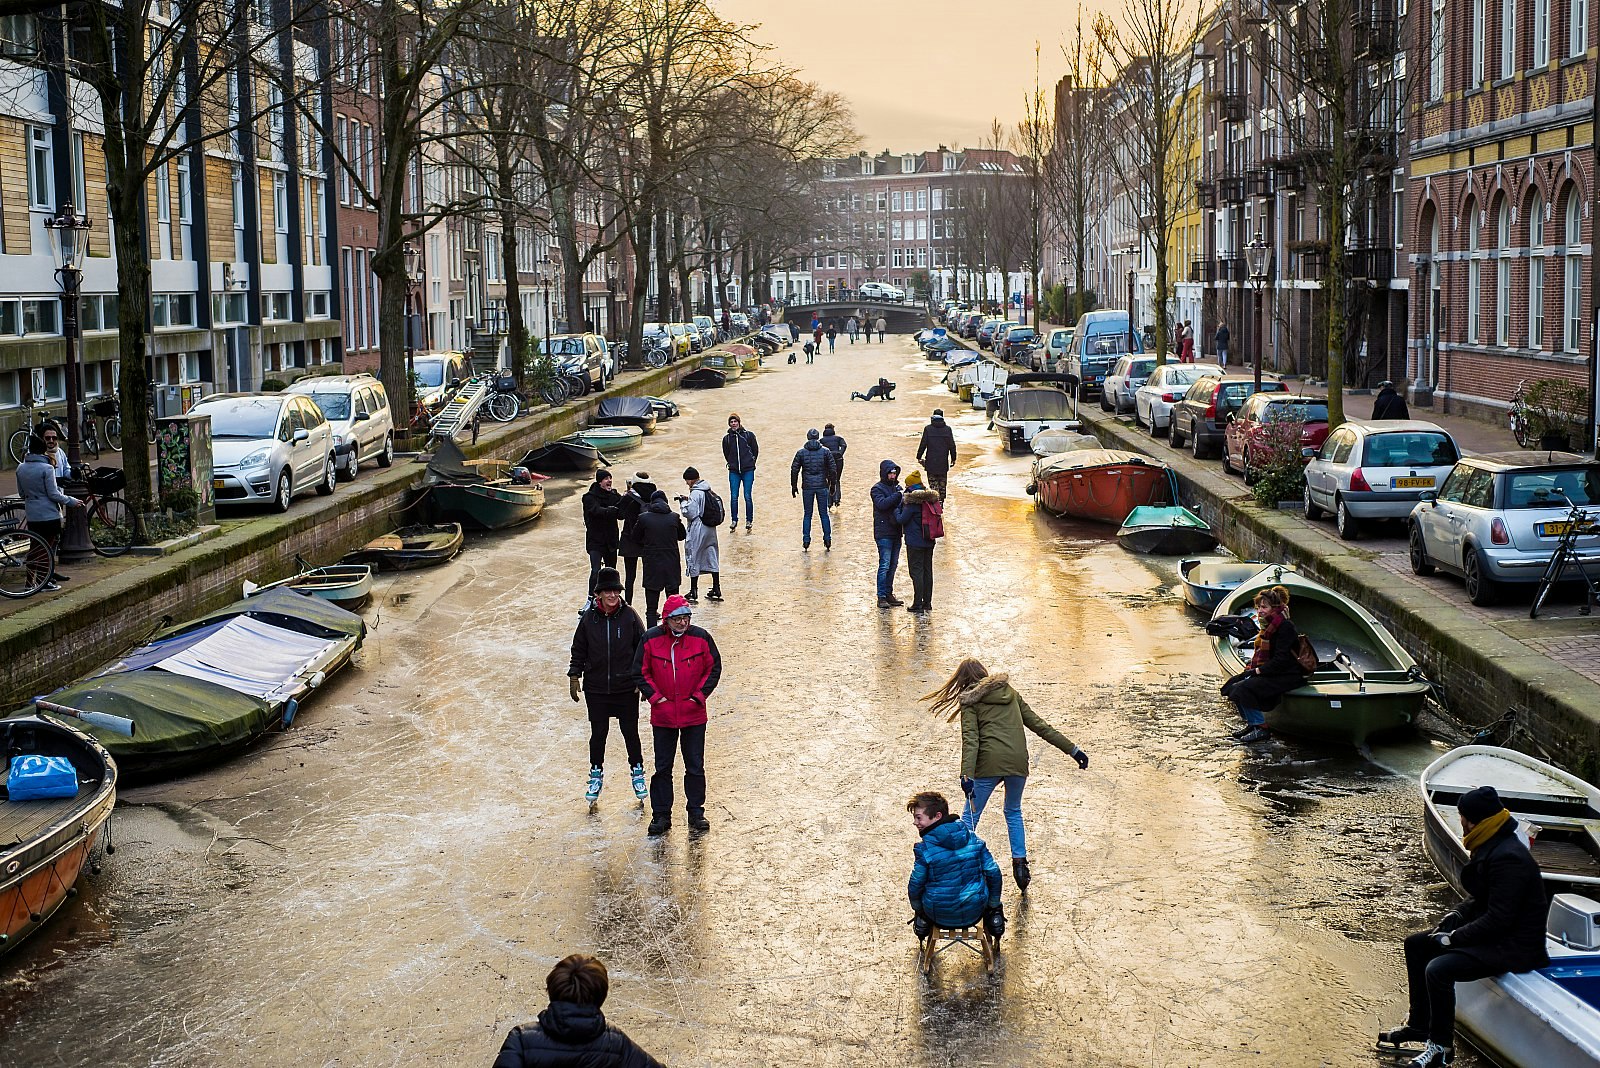 People ice-skating on a frozen Amsterdam canal; the canal is lined with boats on either side, and next to the canal are rows of cars and townhouses. Amsterdam winter